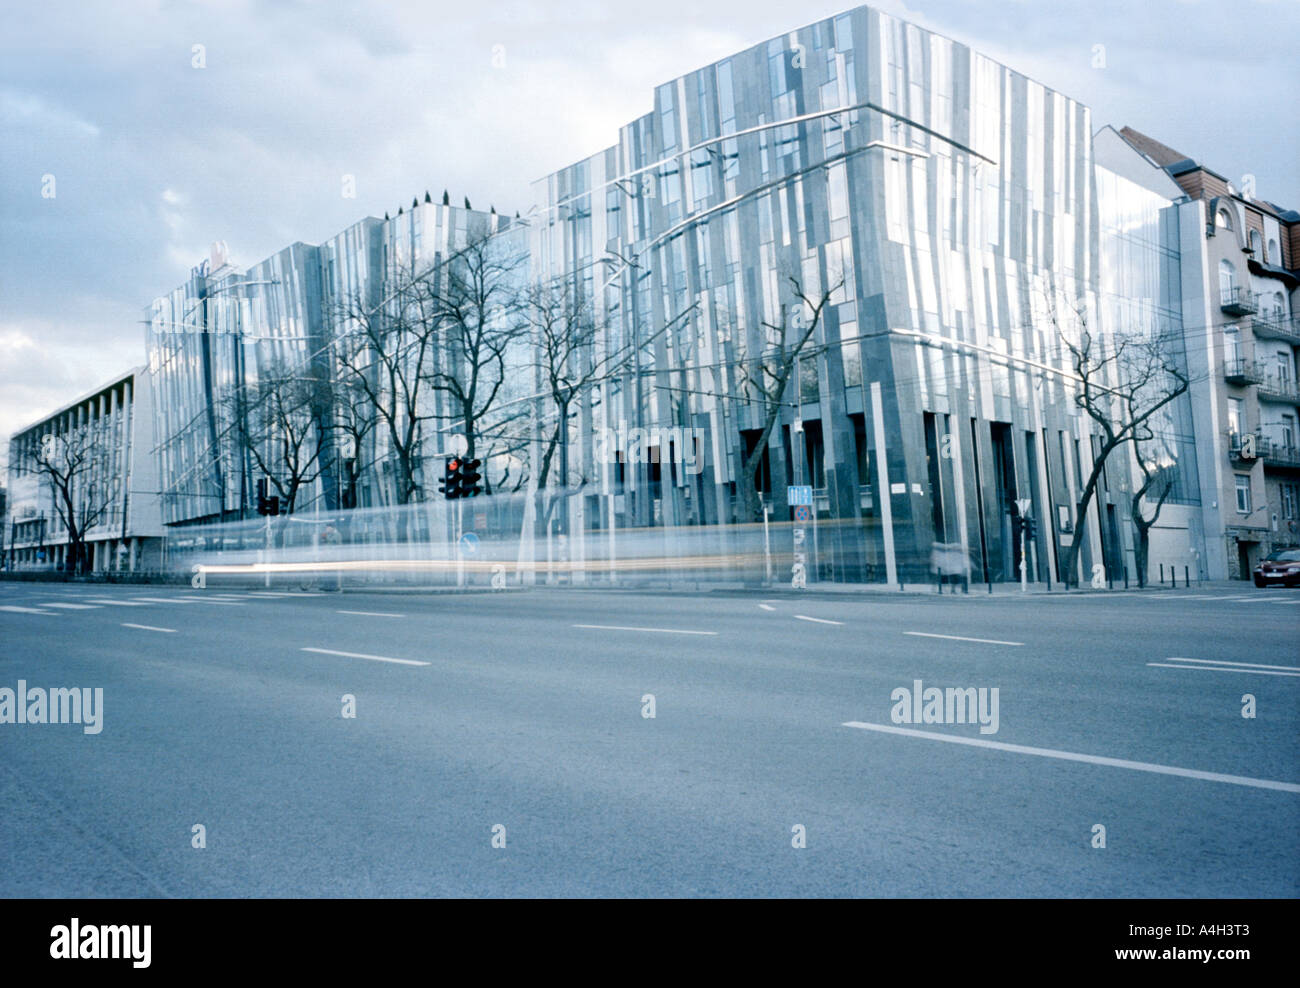 View of the ING bank building in Budapest, Hungary Stock Photo - Alamy